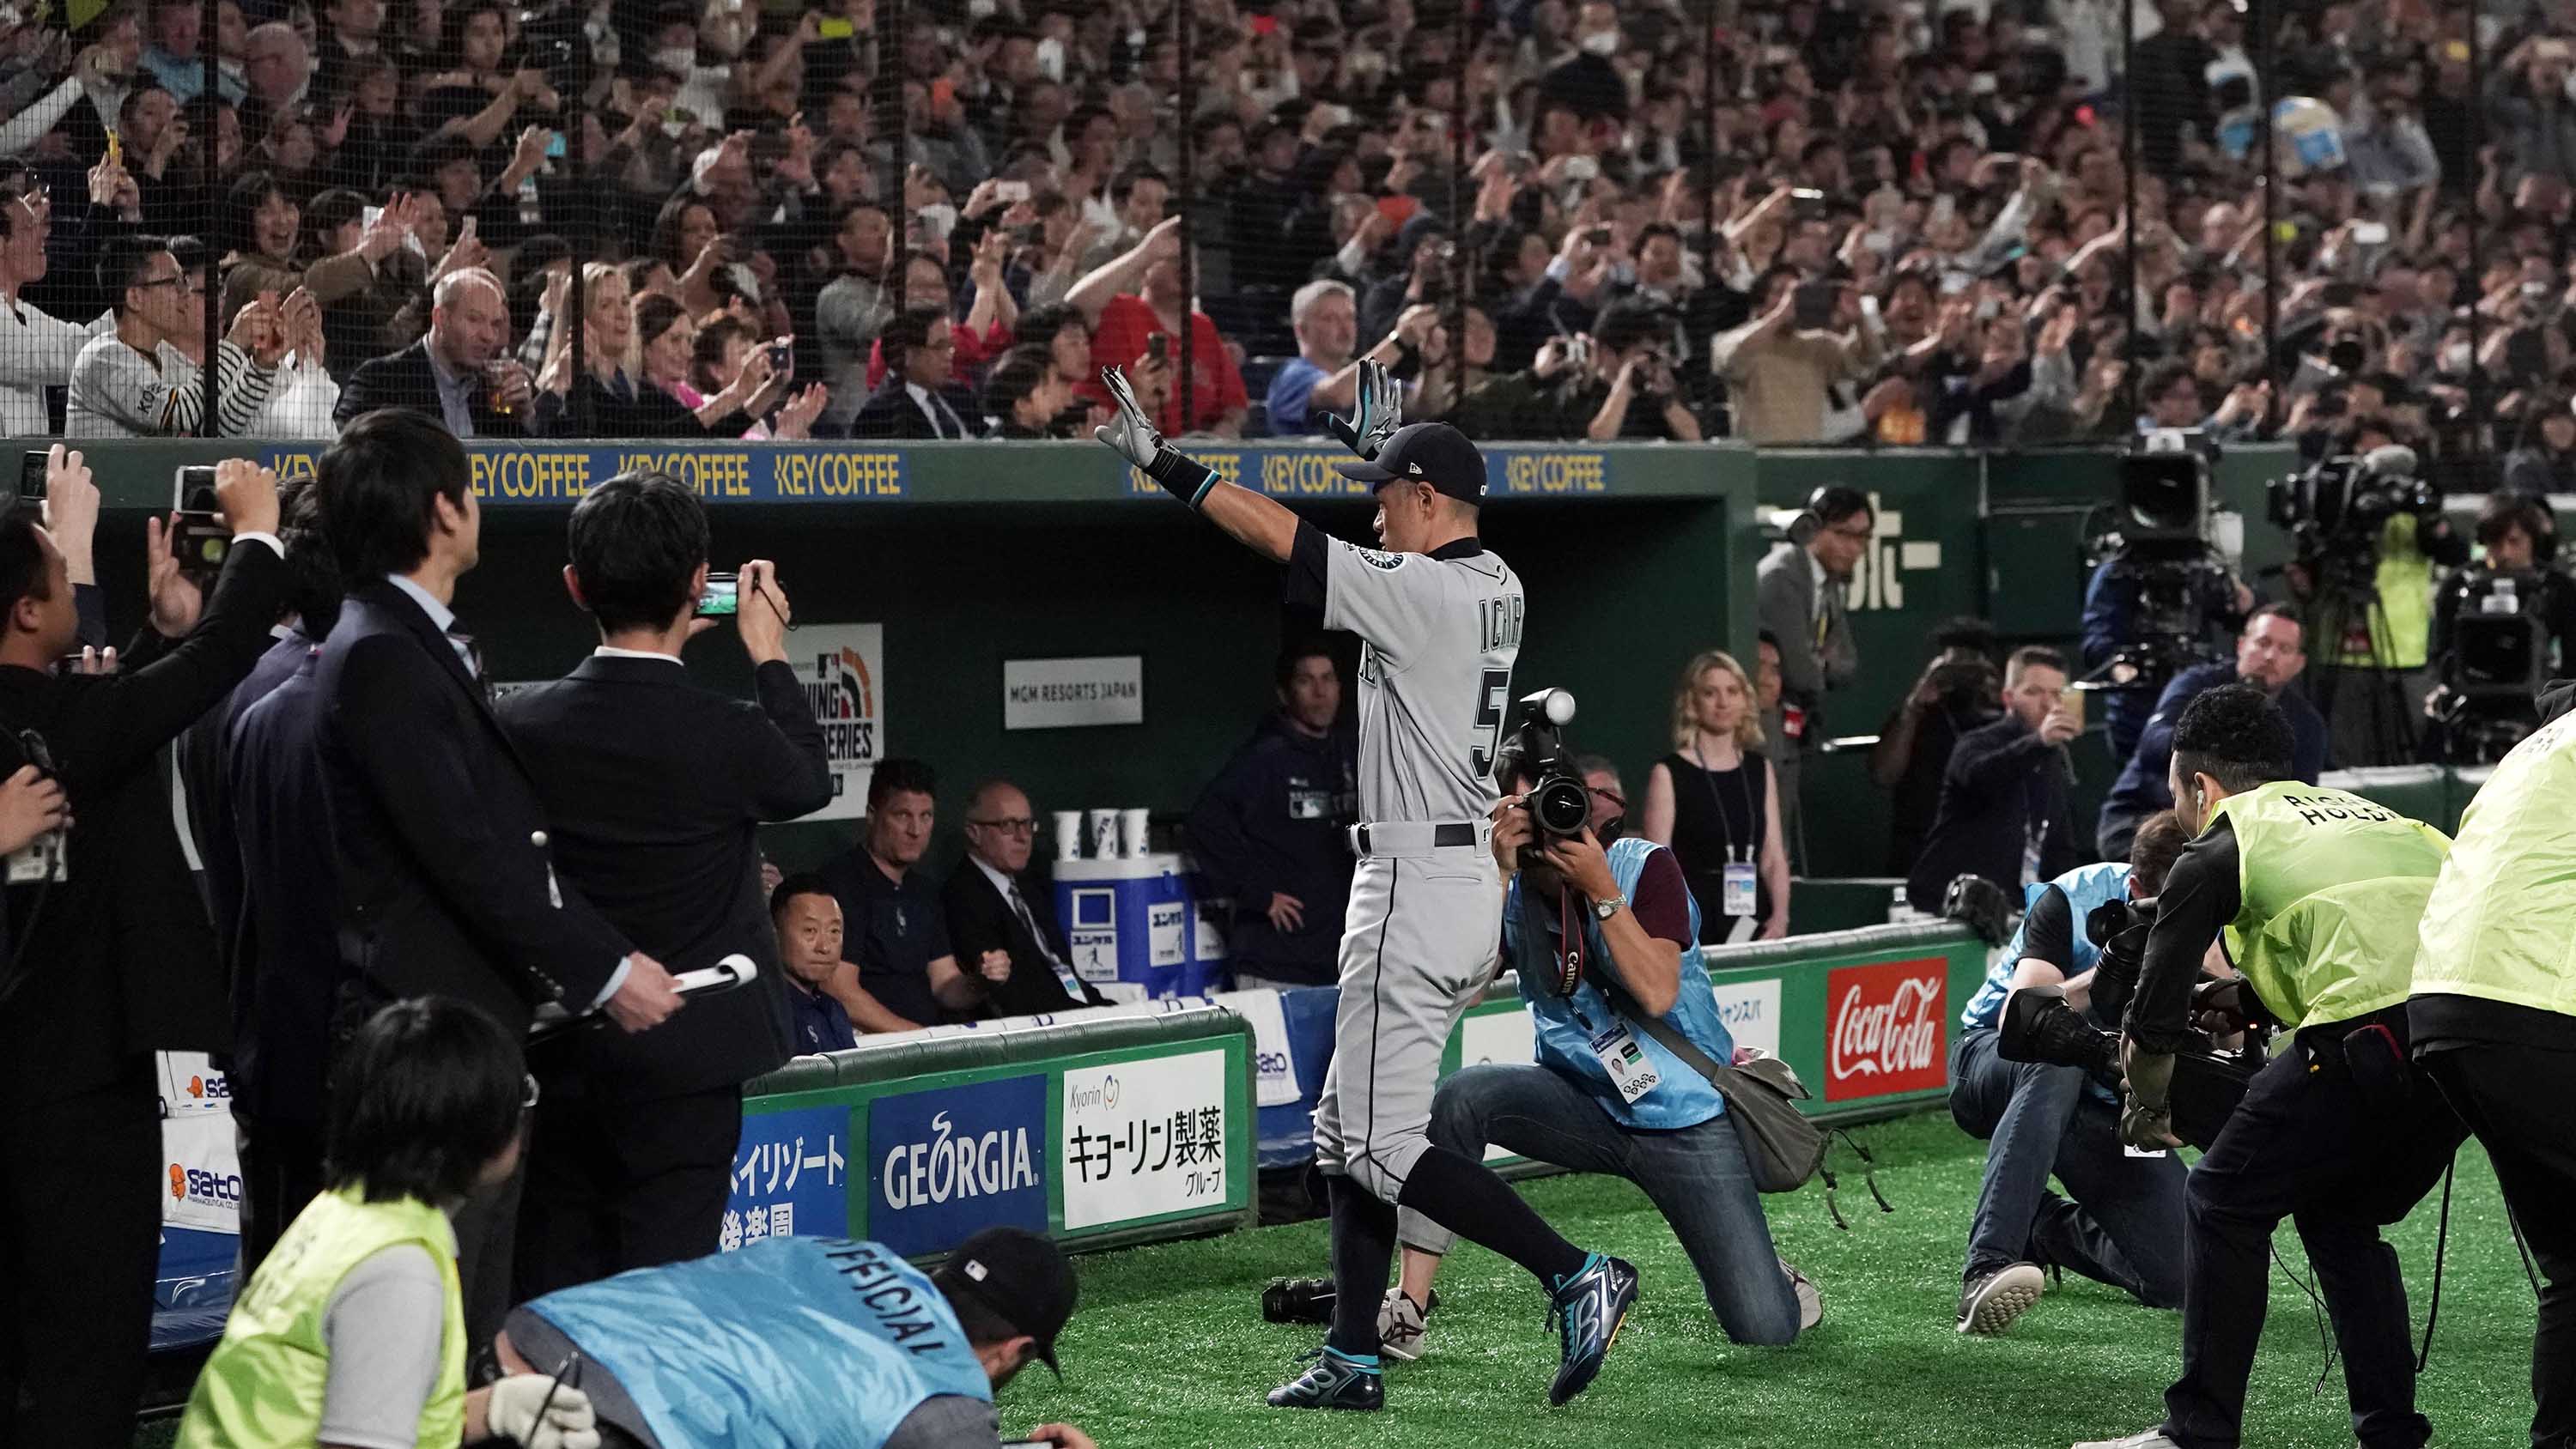 Did Team Japan players hold up Ichiro Suzuki's jersey? Exploring details  behind celebrations after epic WBC final